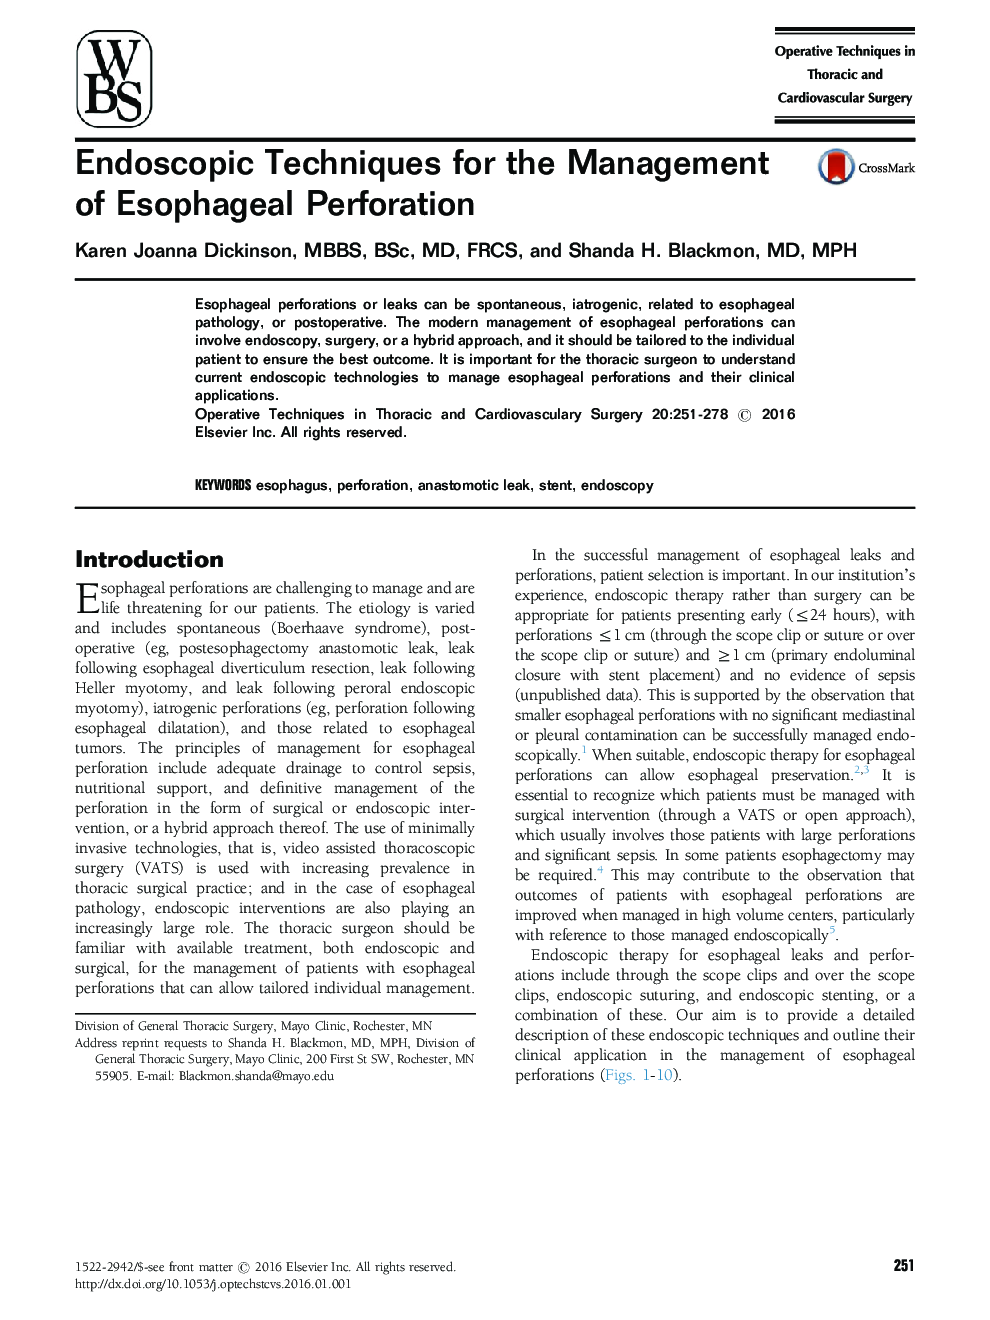 Endoscopic Techniques for the Management of Esophageal Perforation